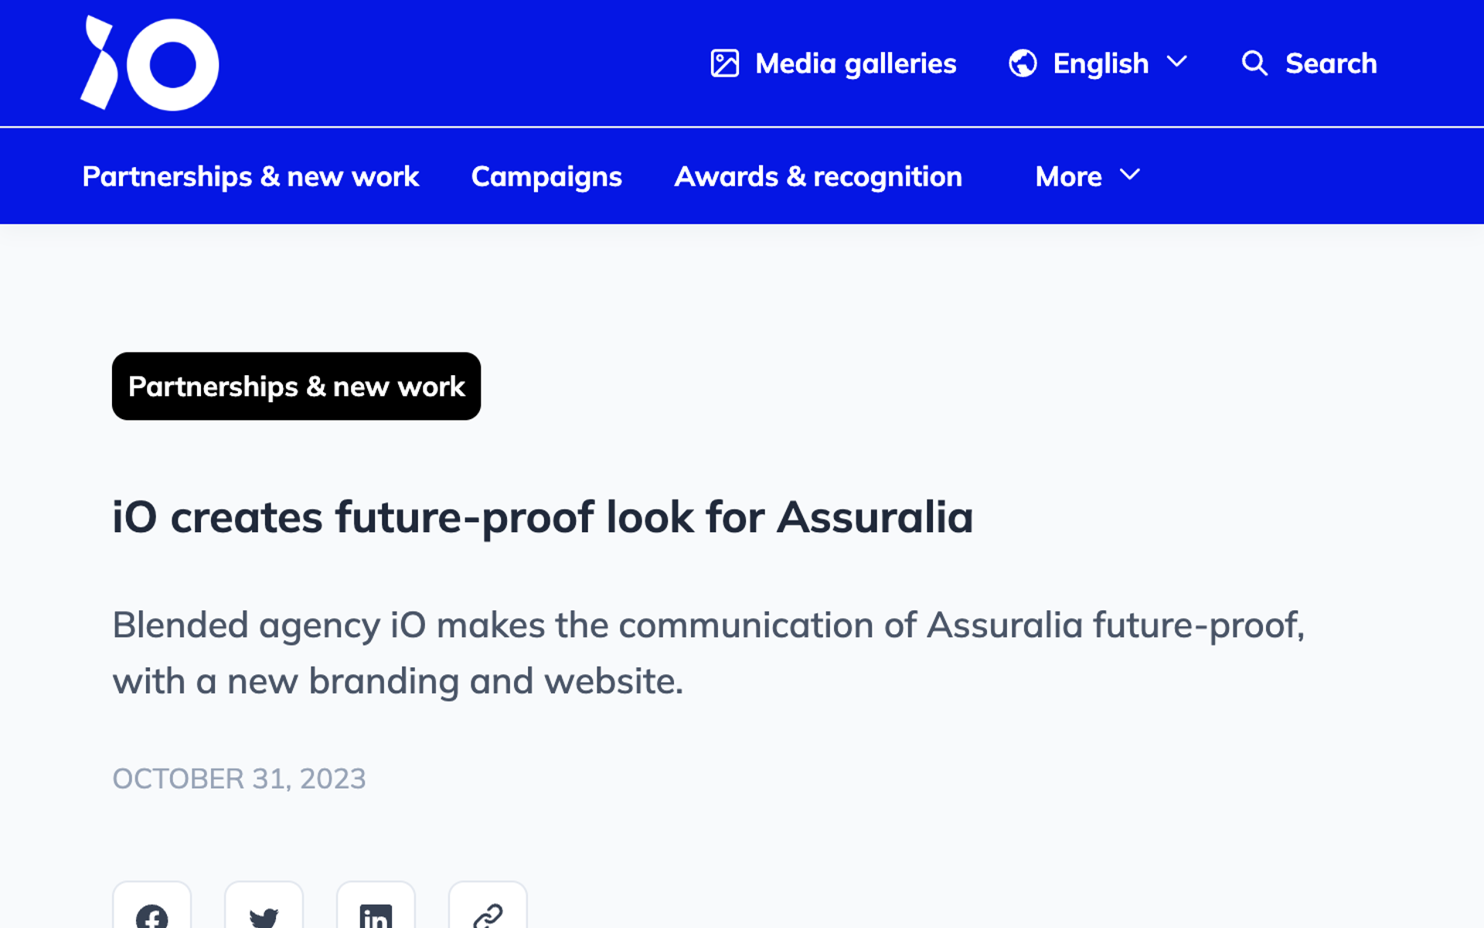 Blended agency iO makes the communication of Assuralia future-proof, with a new branding and website.